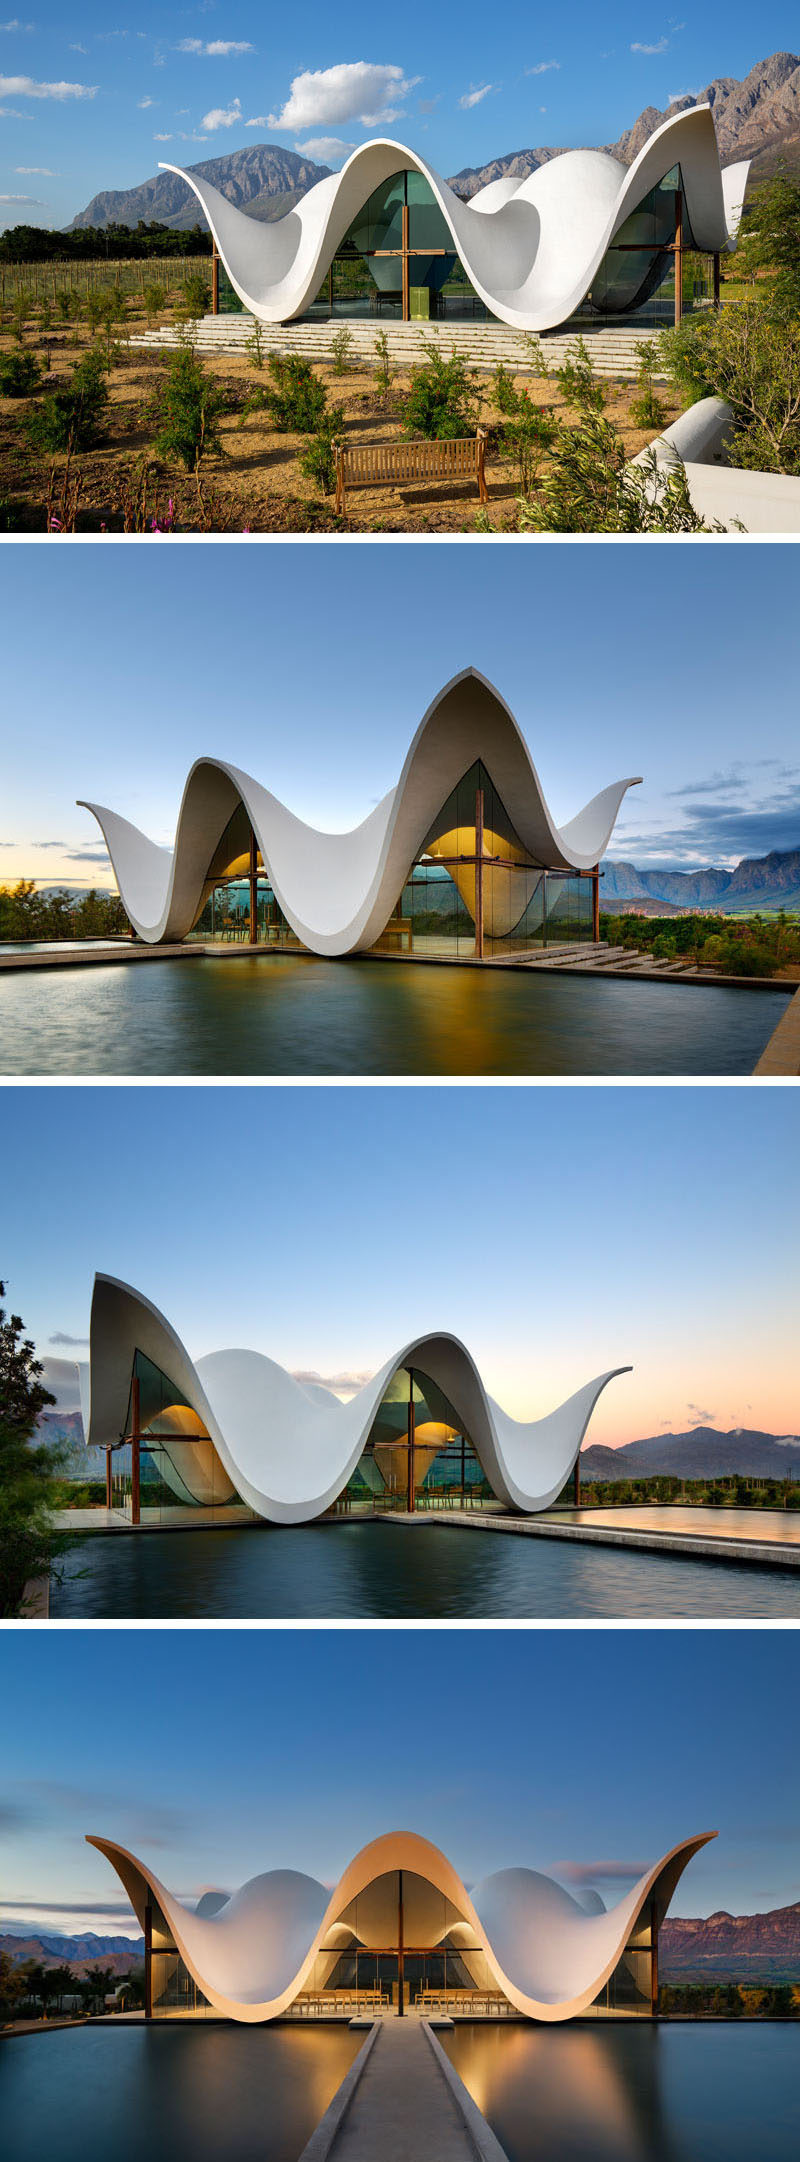 Architecture firm Steyn Studio have designed a sculptural and modern chapel, located within a vineyard in Western Cape, South Africa, that's surrounded by a valley and mountains.